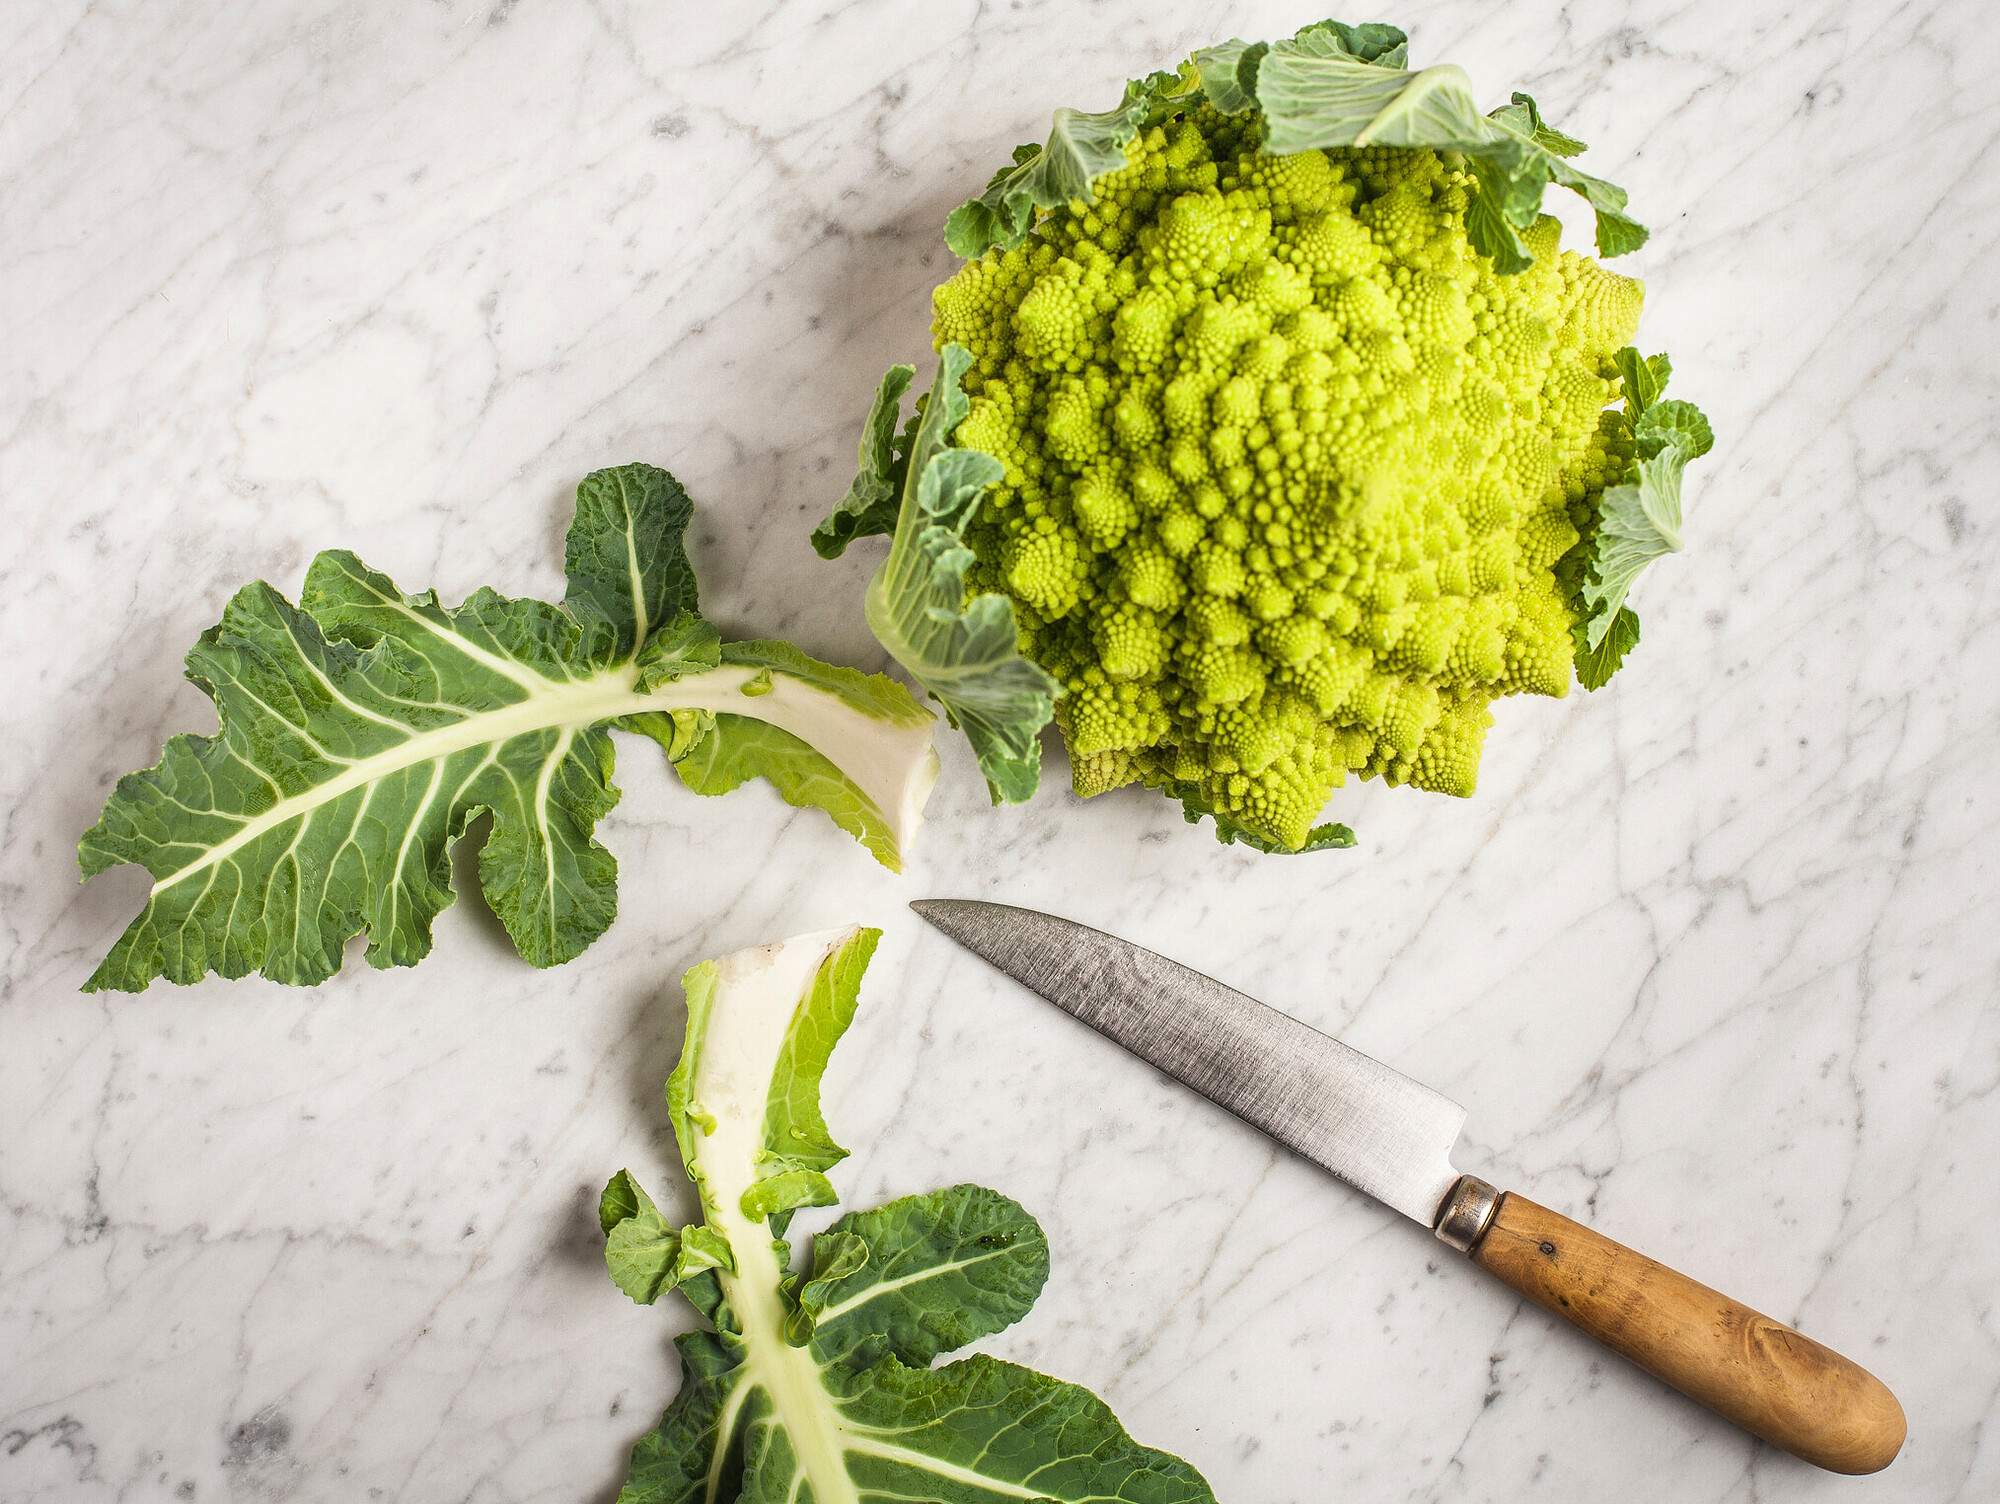 Let's slice a Romanesco in two